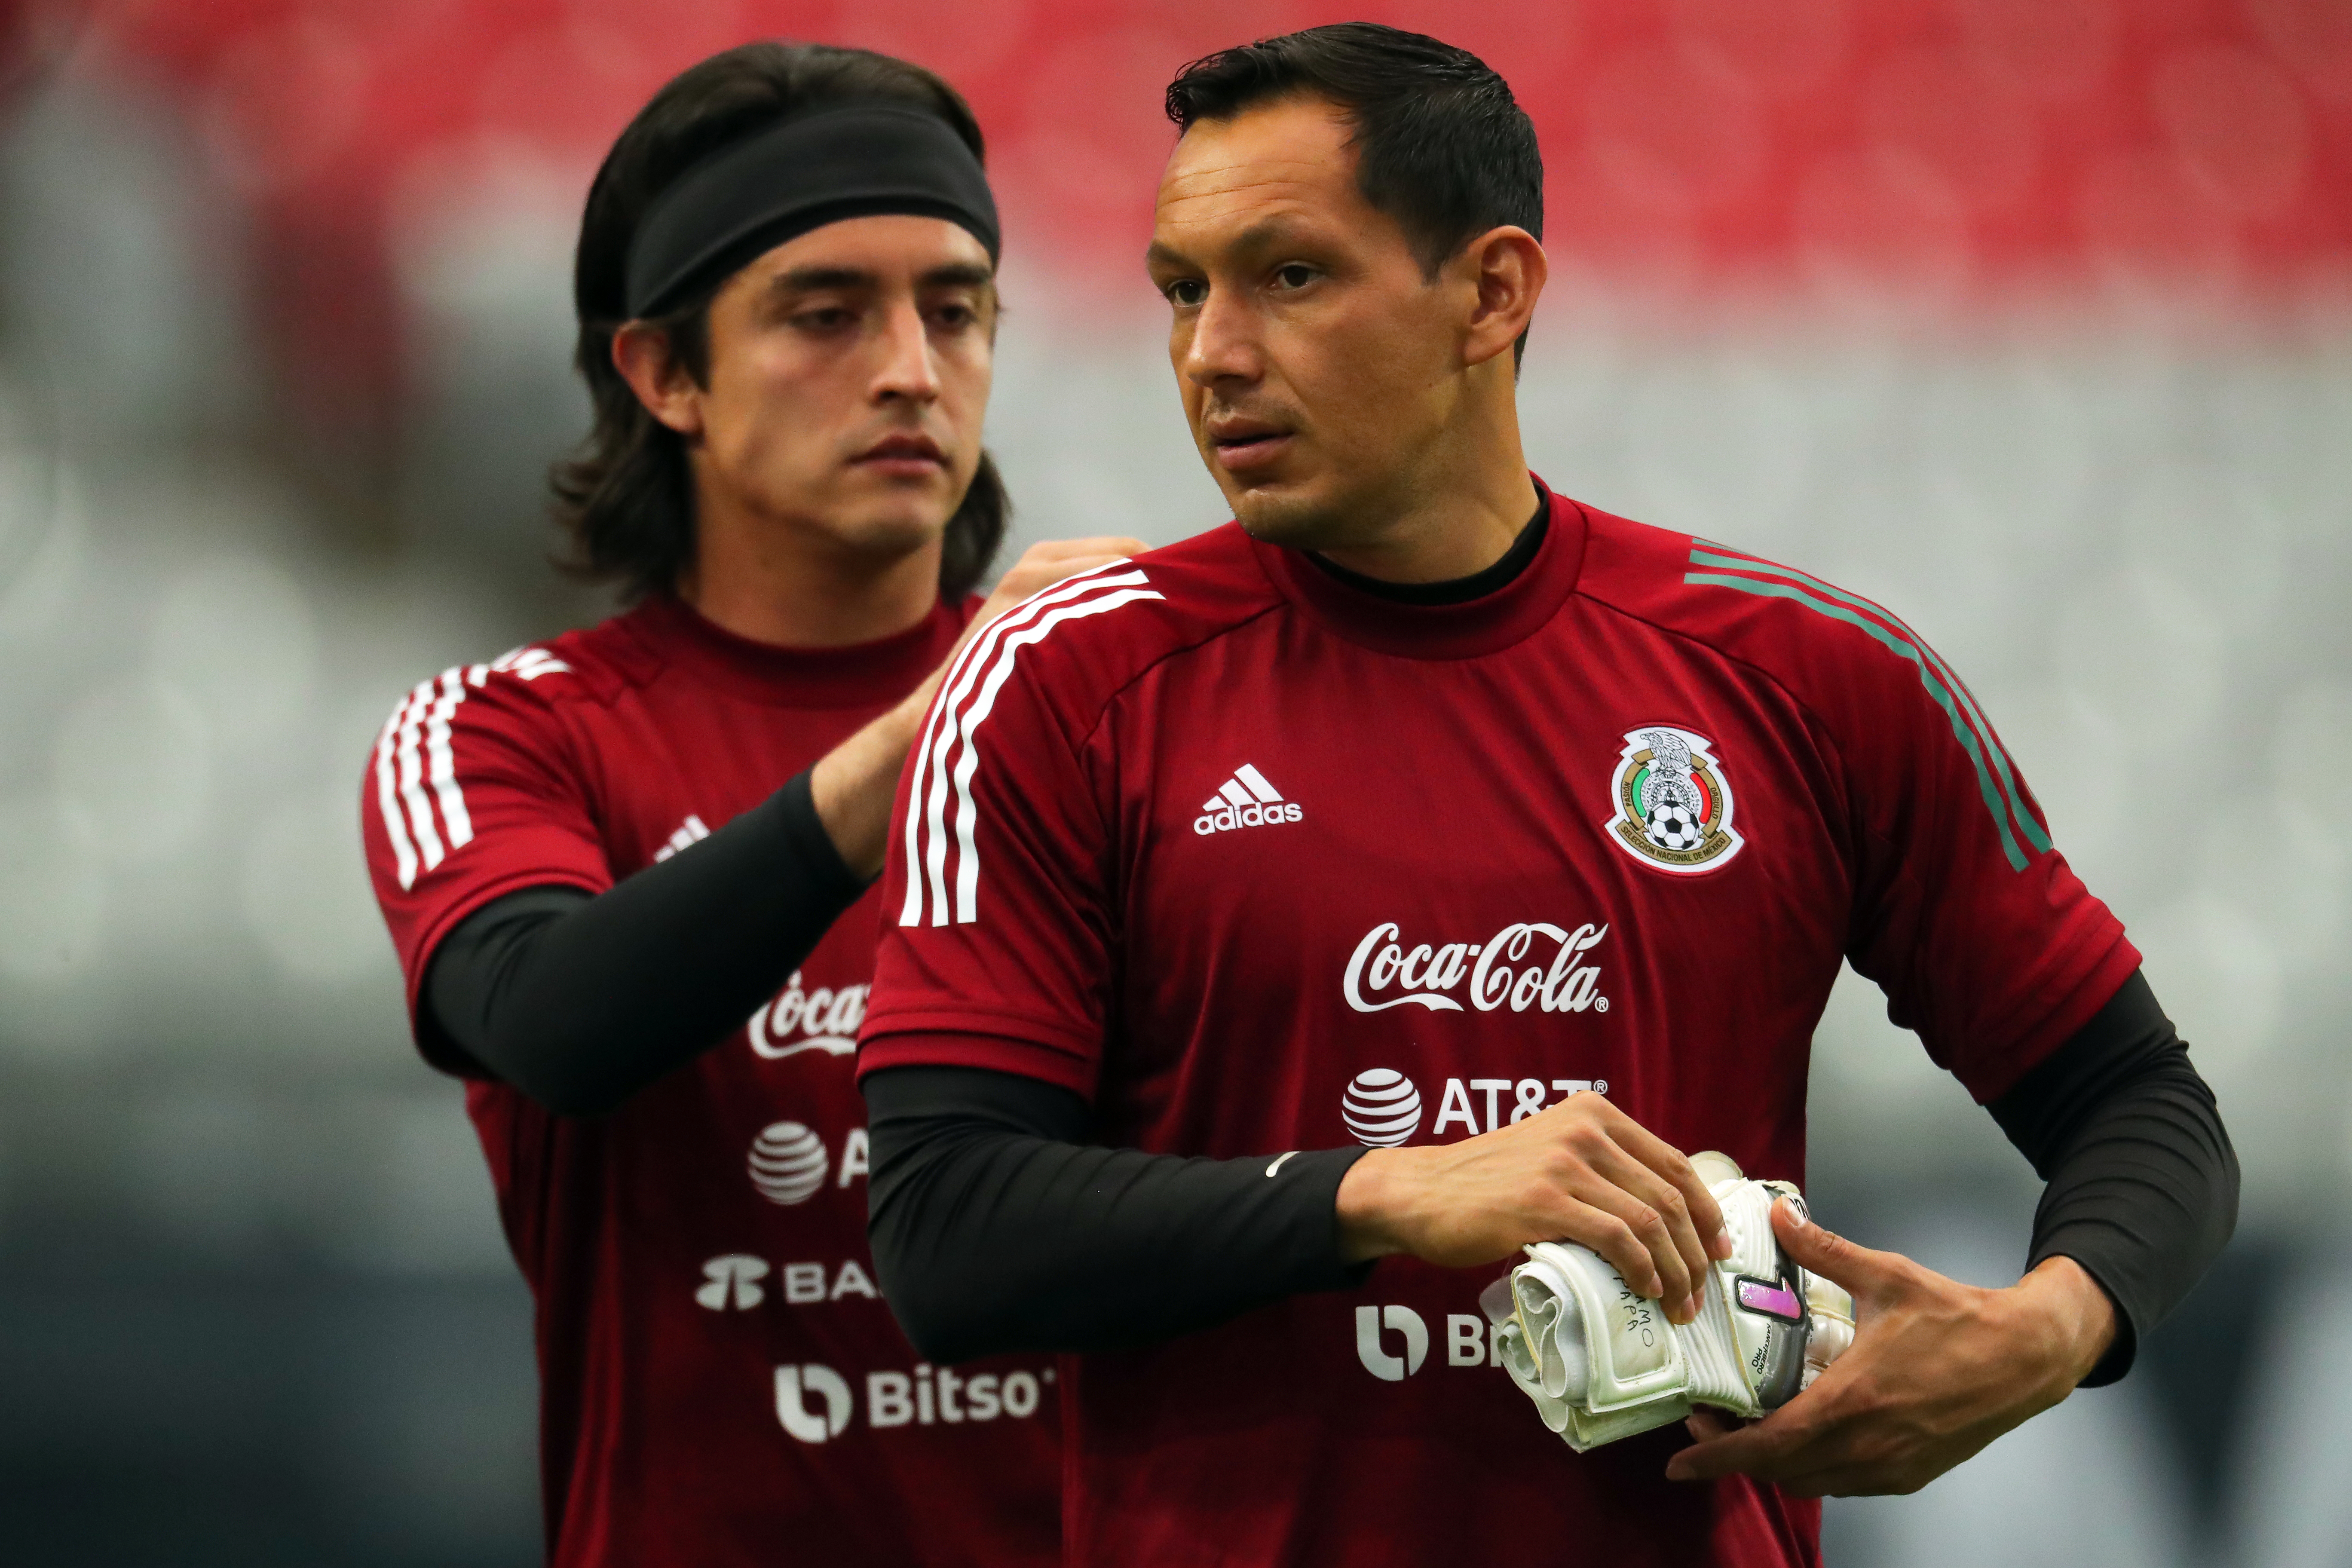 Goalkeeper Carlos Acevedo (L) of Mexico helps teammate Rodolfo Cota (R) during a training session ahead of a match between Mexico and Uruguay at State Farm Stadium on June 1, 2022 in Glendale, Arizona.